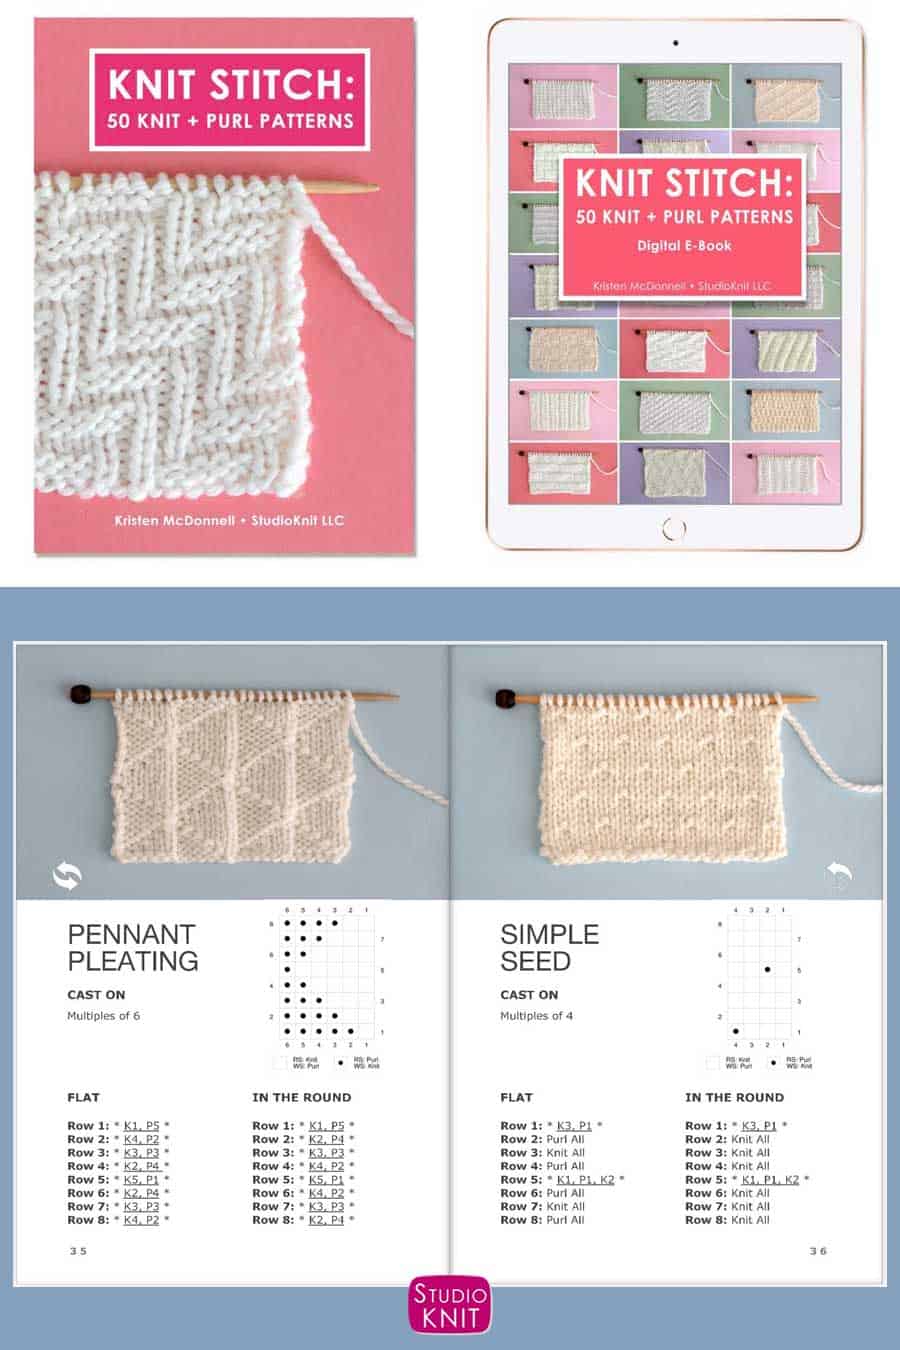 Knit Stitch Pattern Book with Pennant Pleating and Simple Seed Stitch